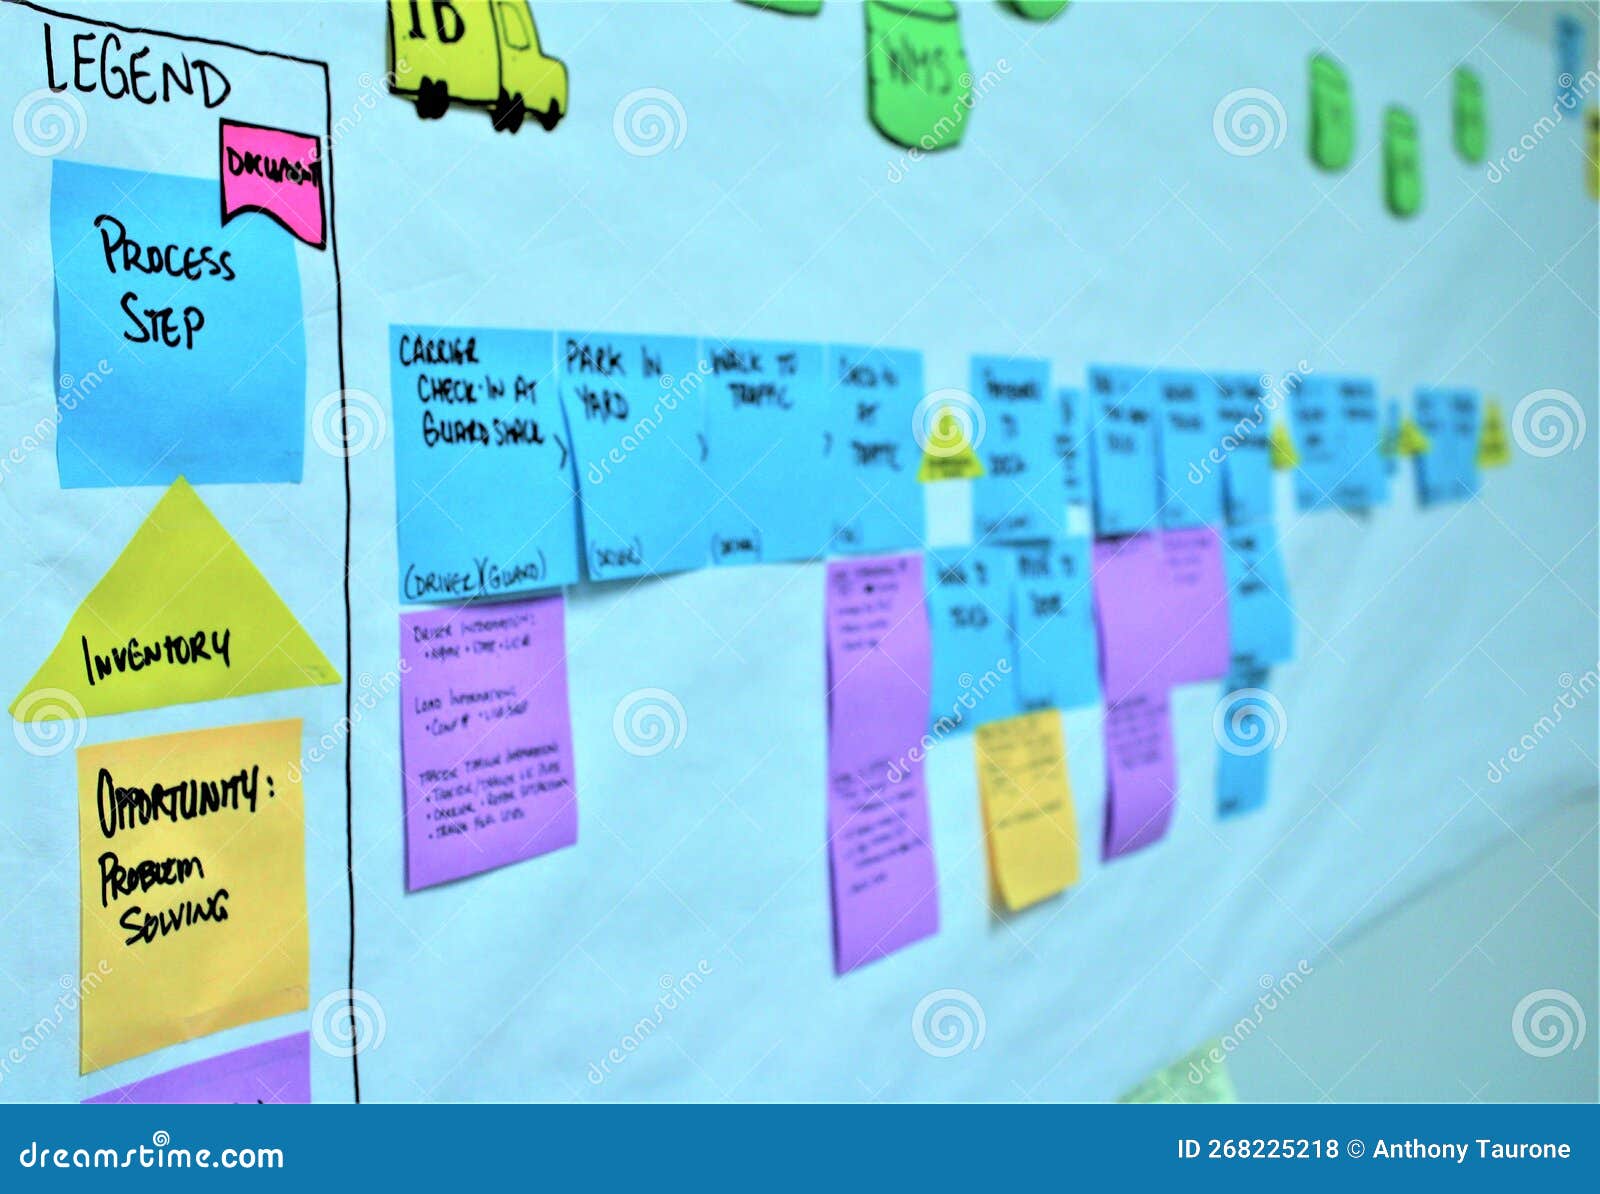 lean value stream map for business process abstract